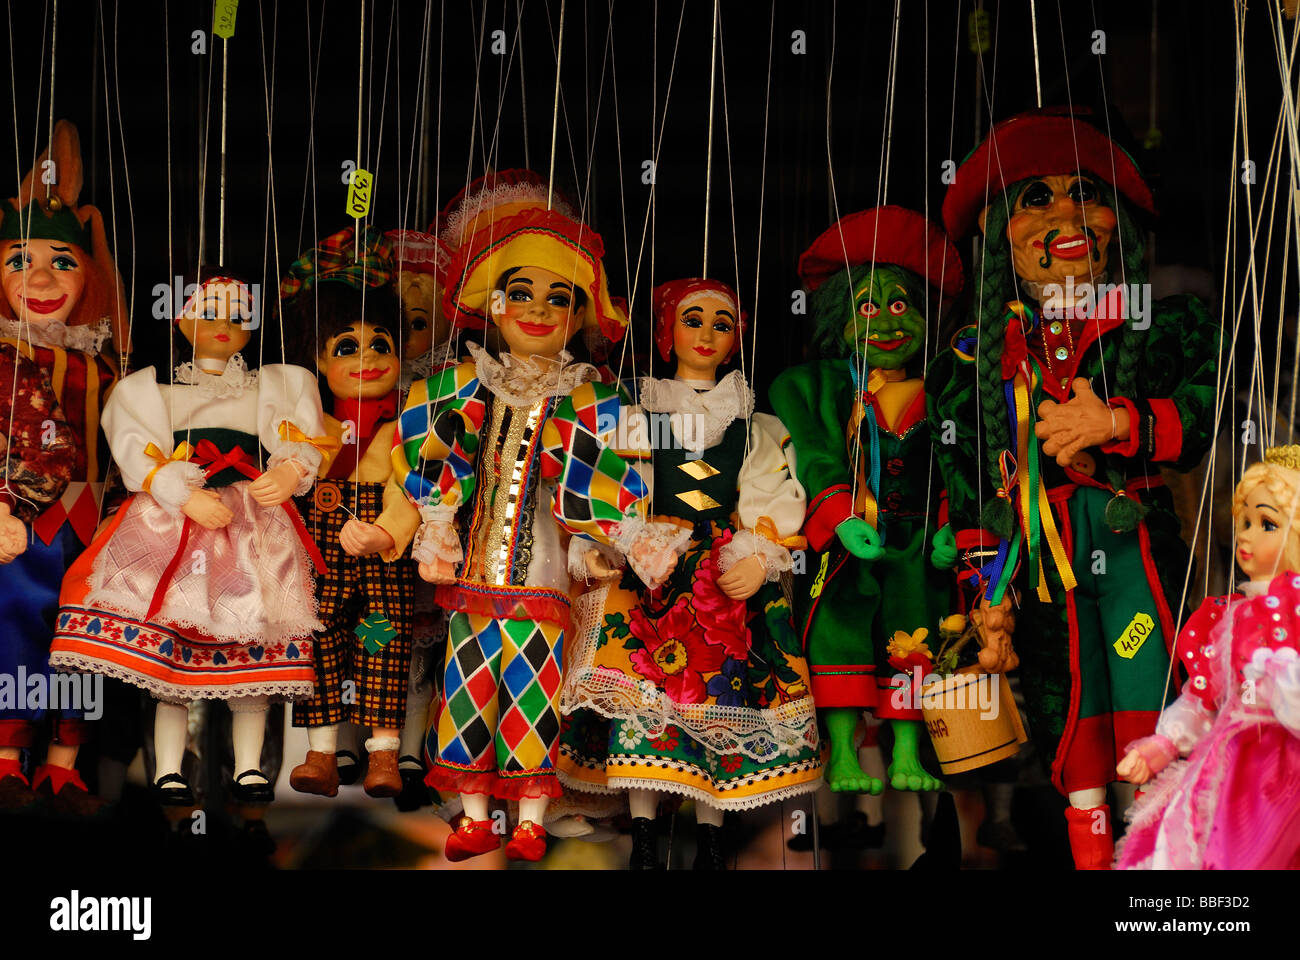 Marionette puppets for sale in market stall, Prague Stock Photo